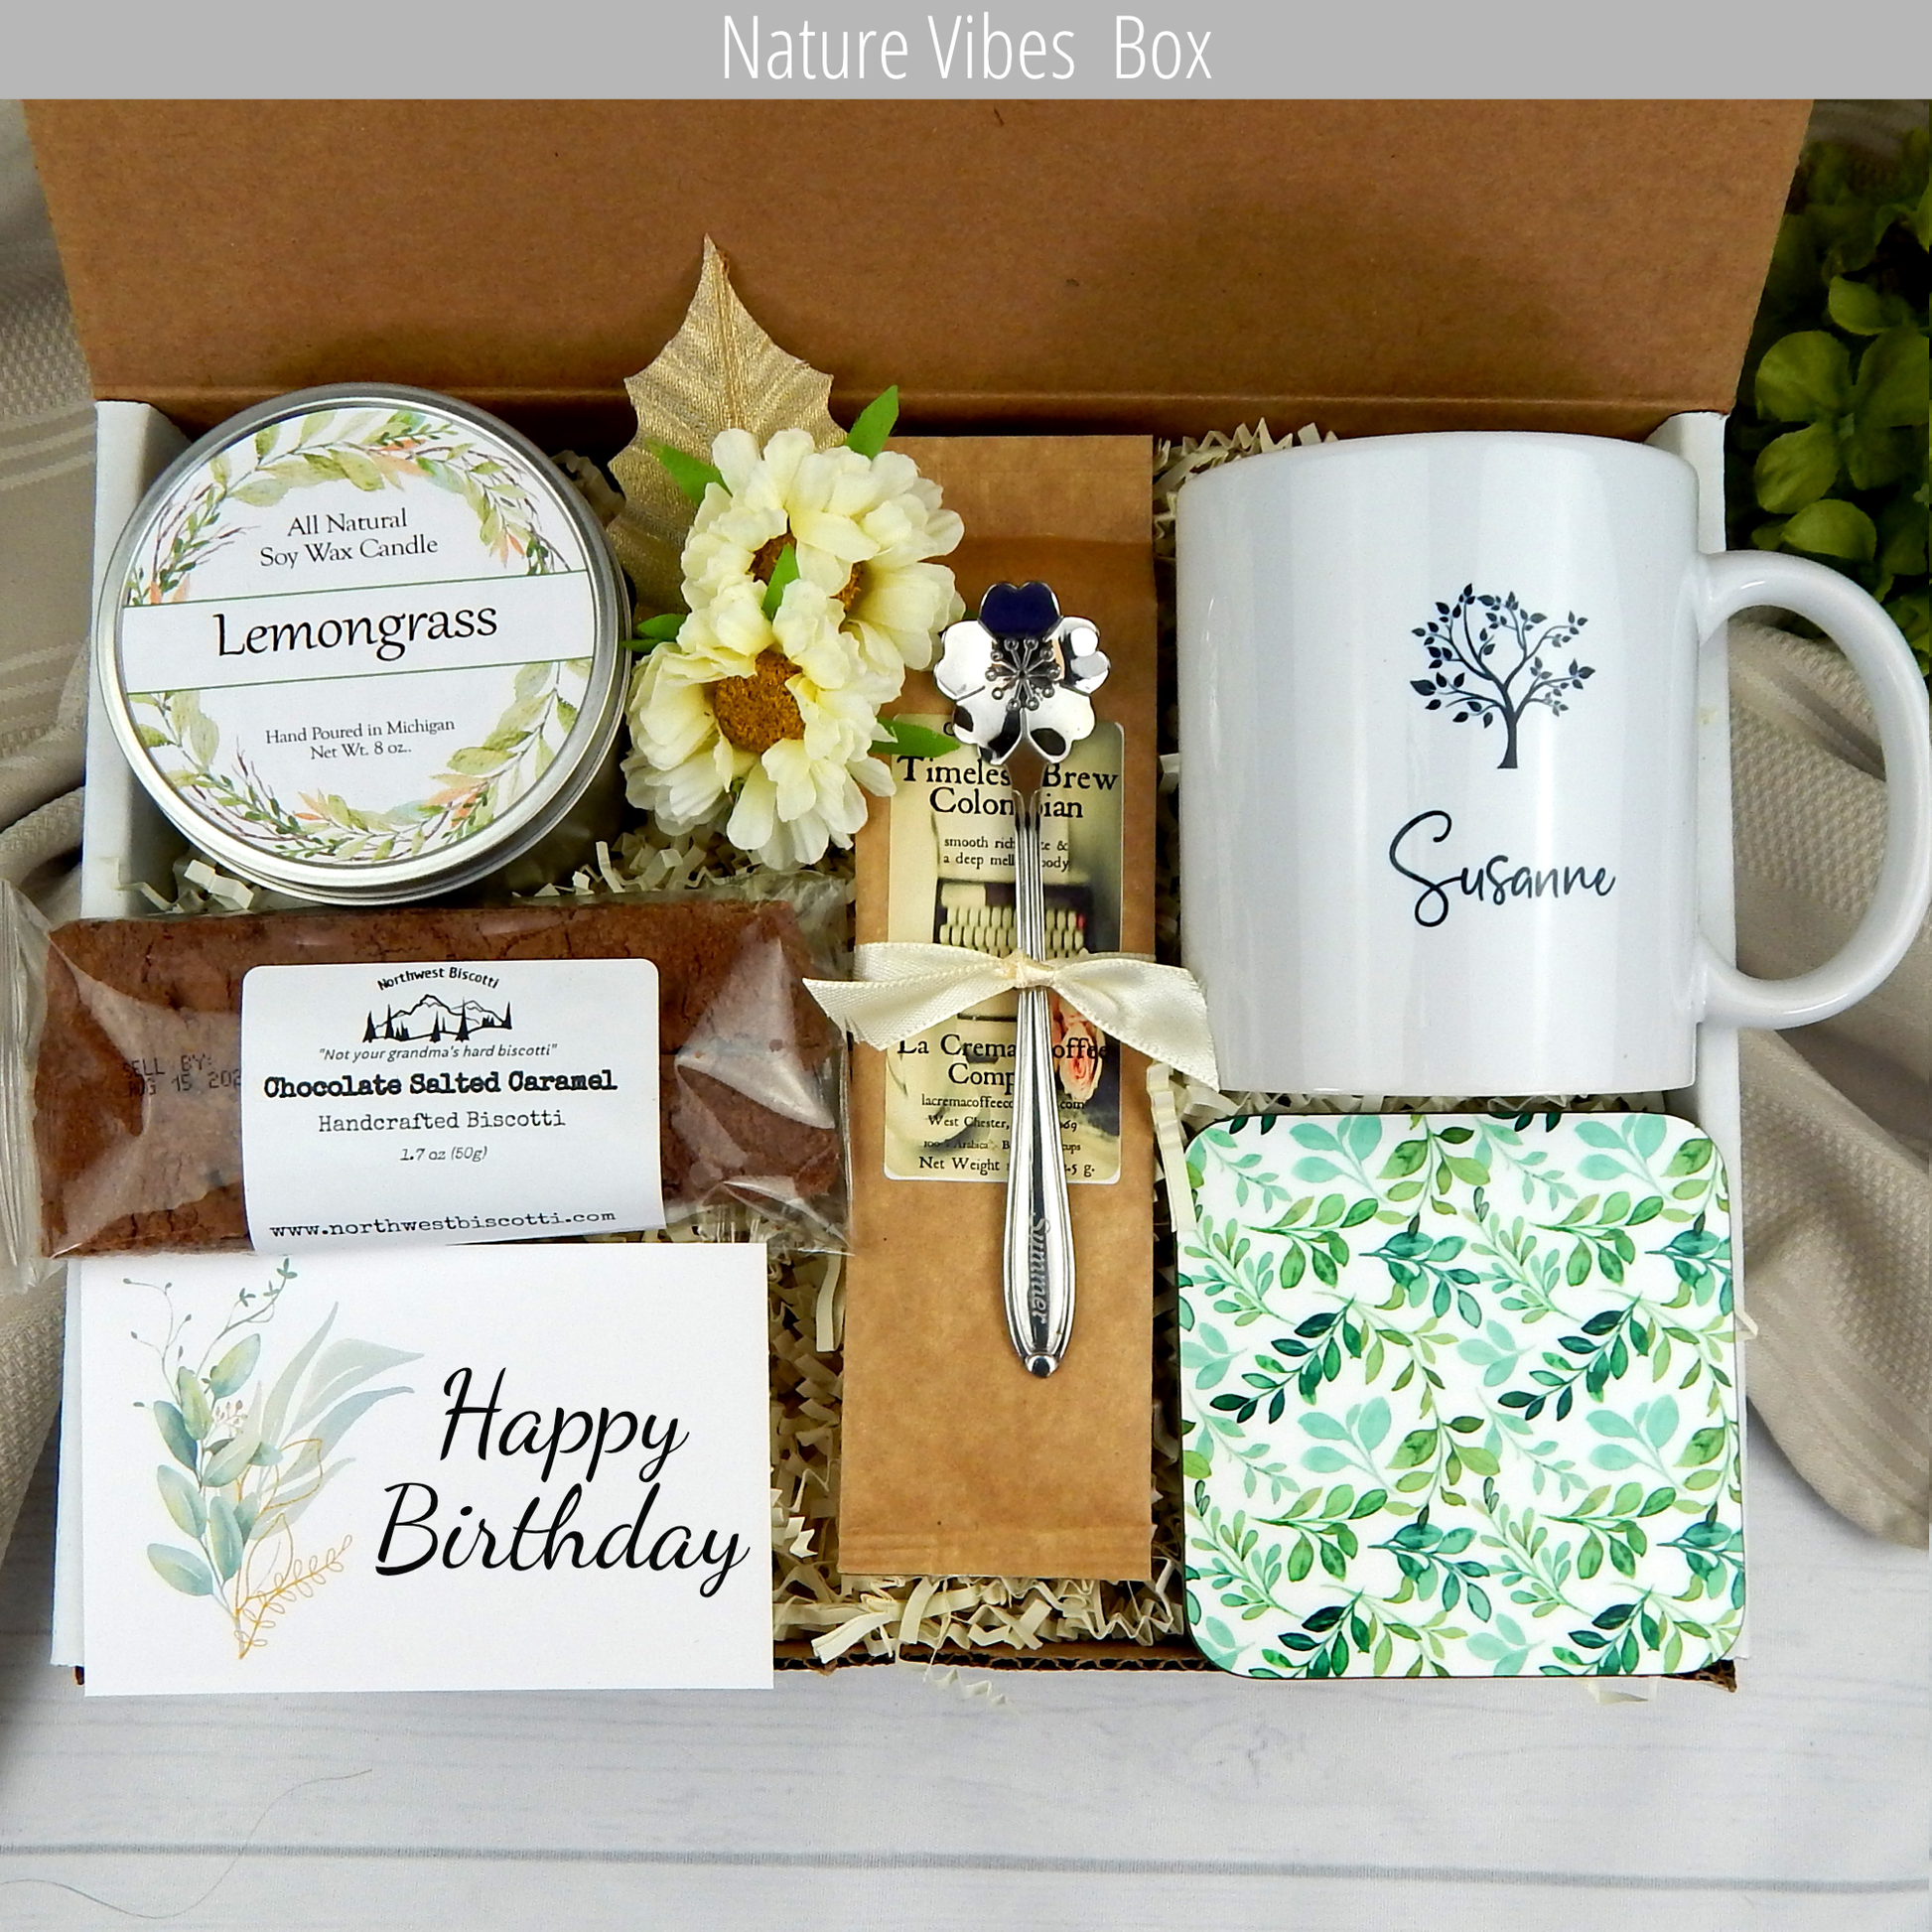 Happy Birthday Gift Box for Her, Personalized Birthday Box With